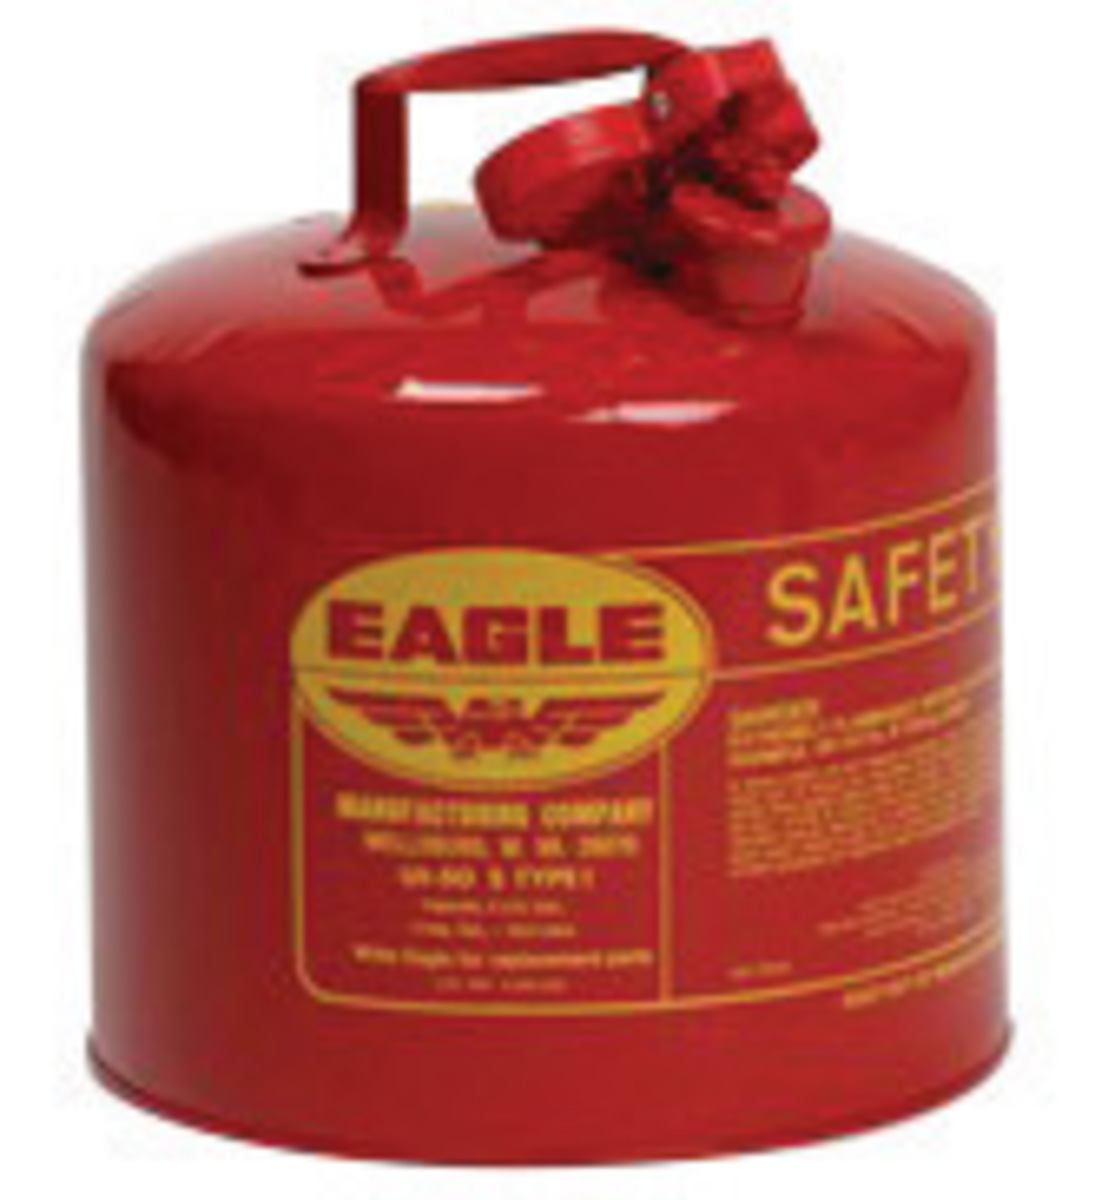 Eagle 5 Gallon Red 24 Gauge Galvanized Steel Type I Safety Can With Non-Sparking Flame Arrestor Without Funnel